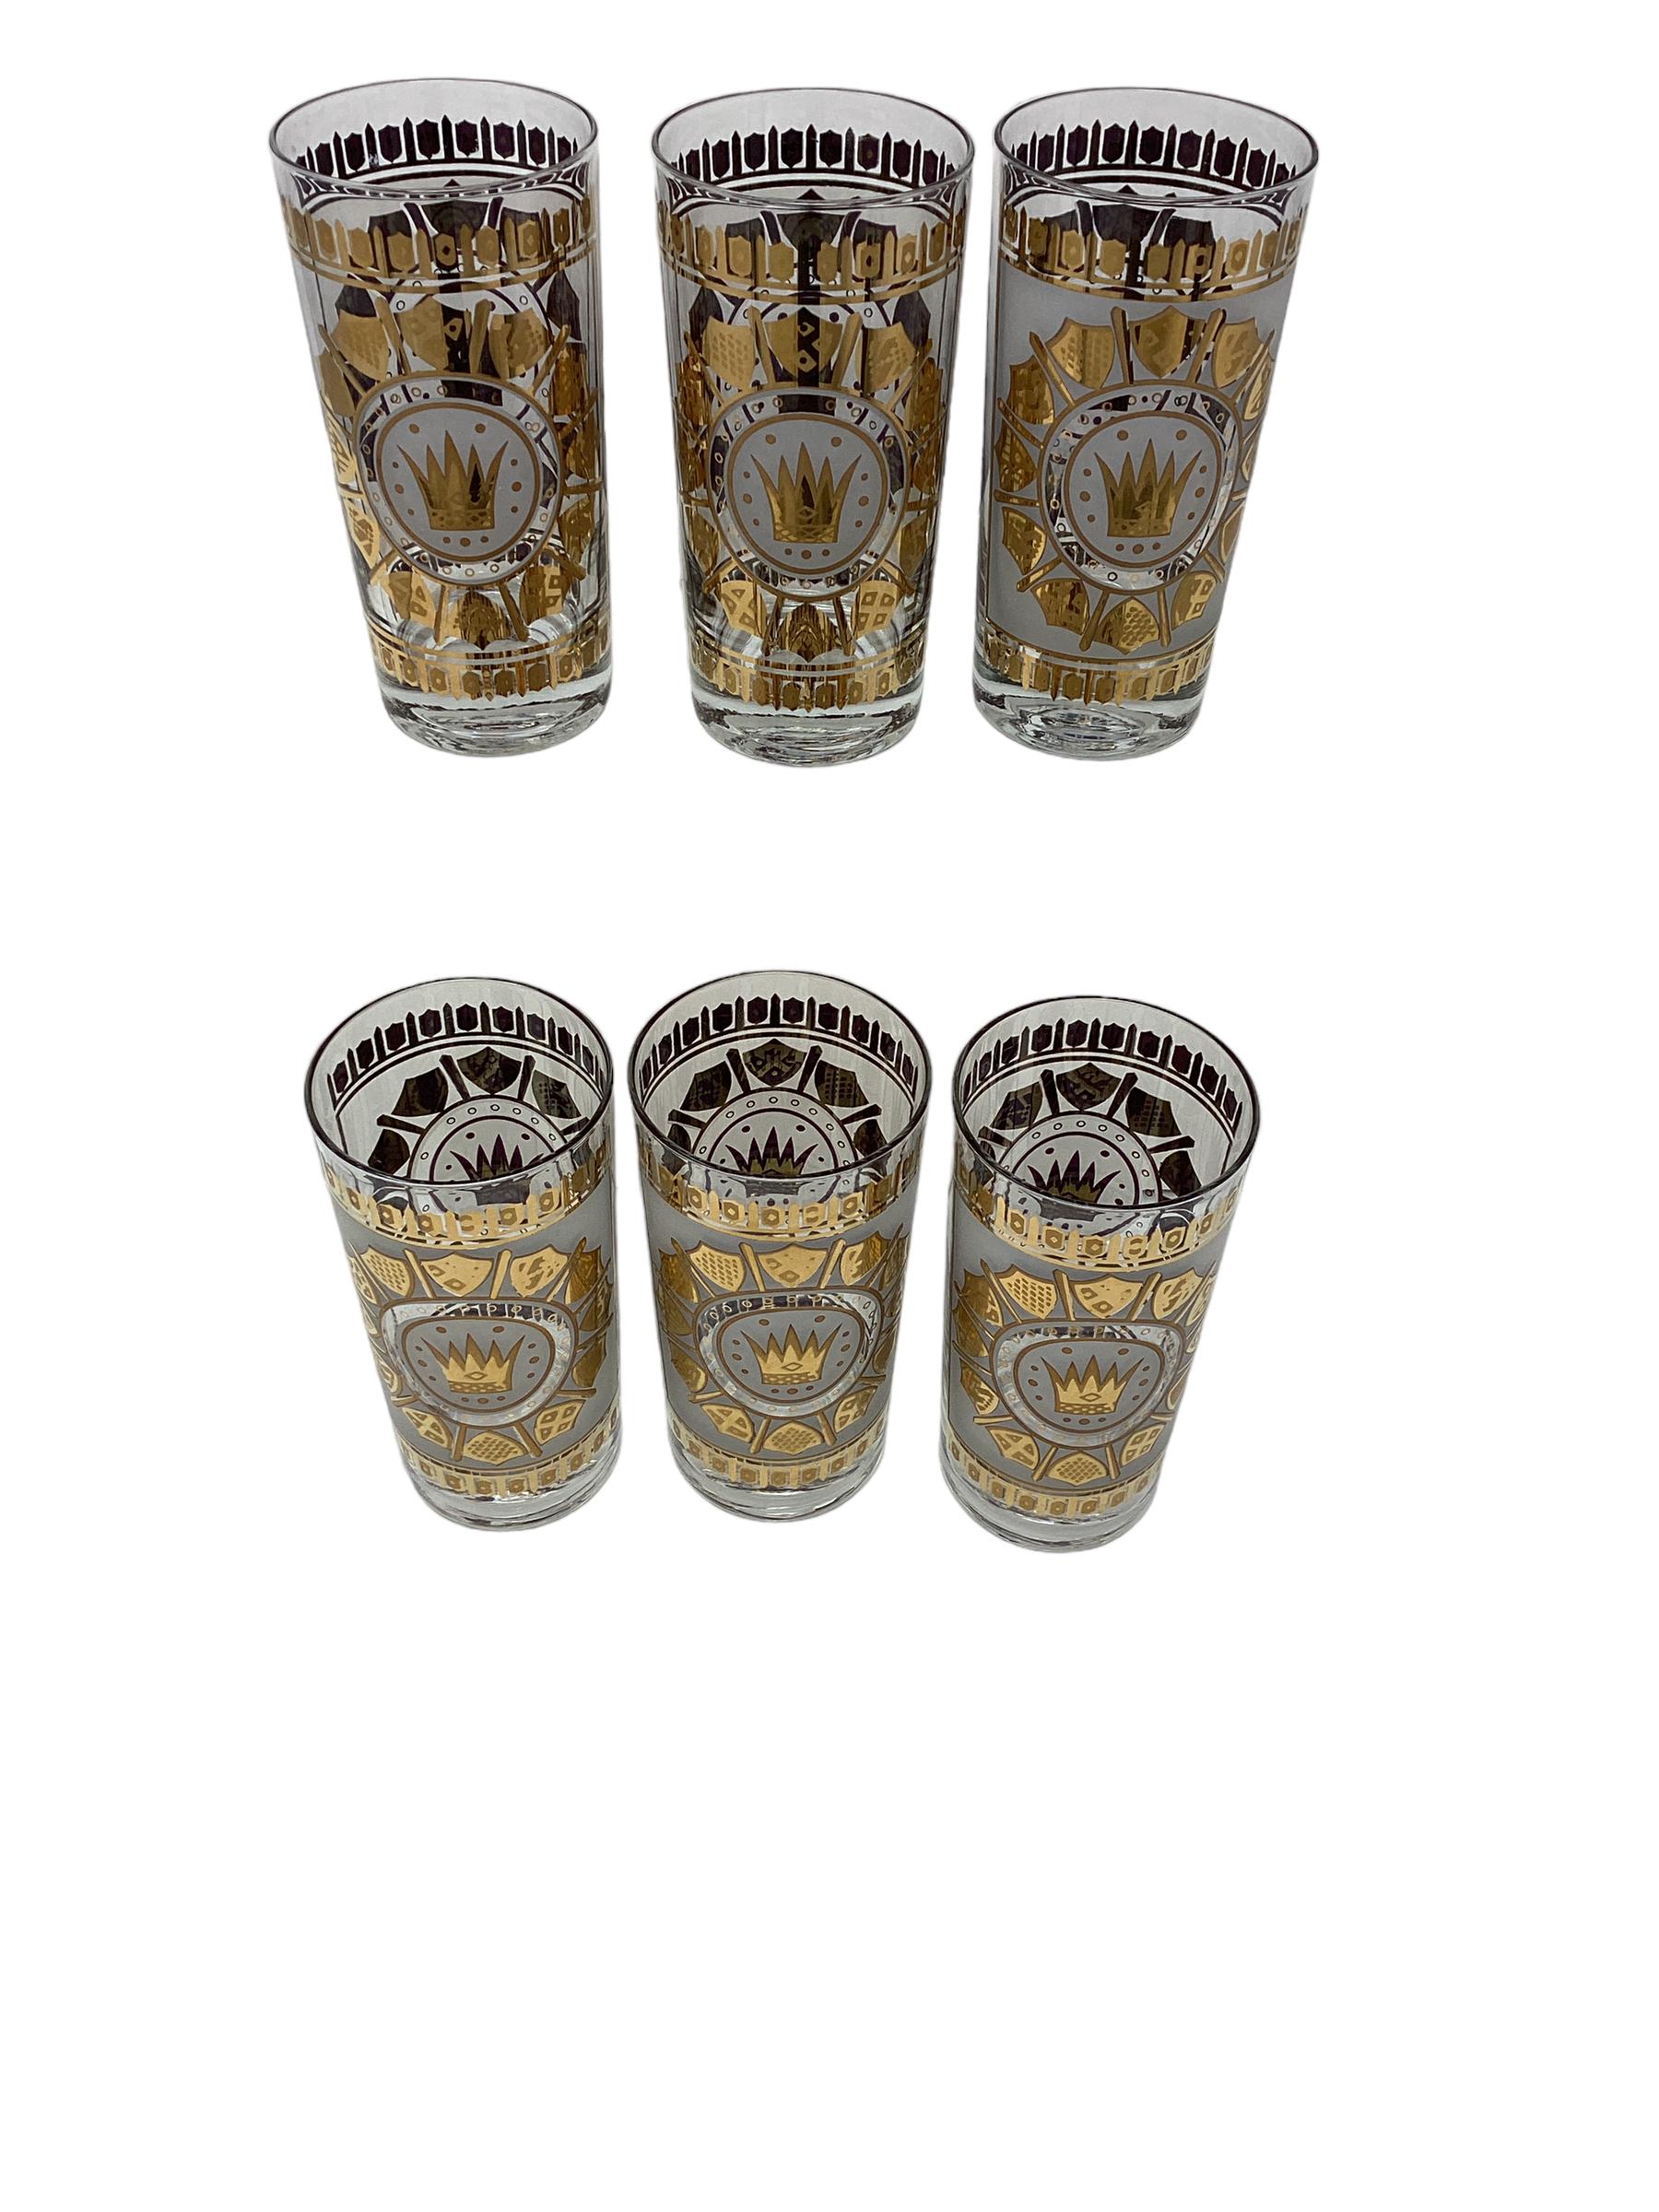 Mid-Century Modern Set of 6 Highball Glasses with Crowns and Shields Decoration. For Sale